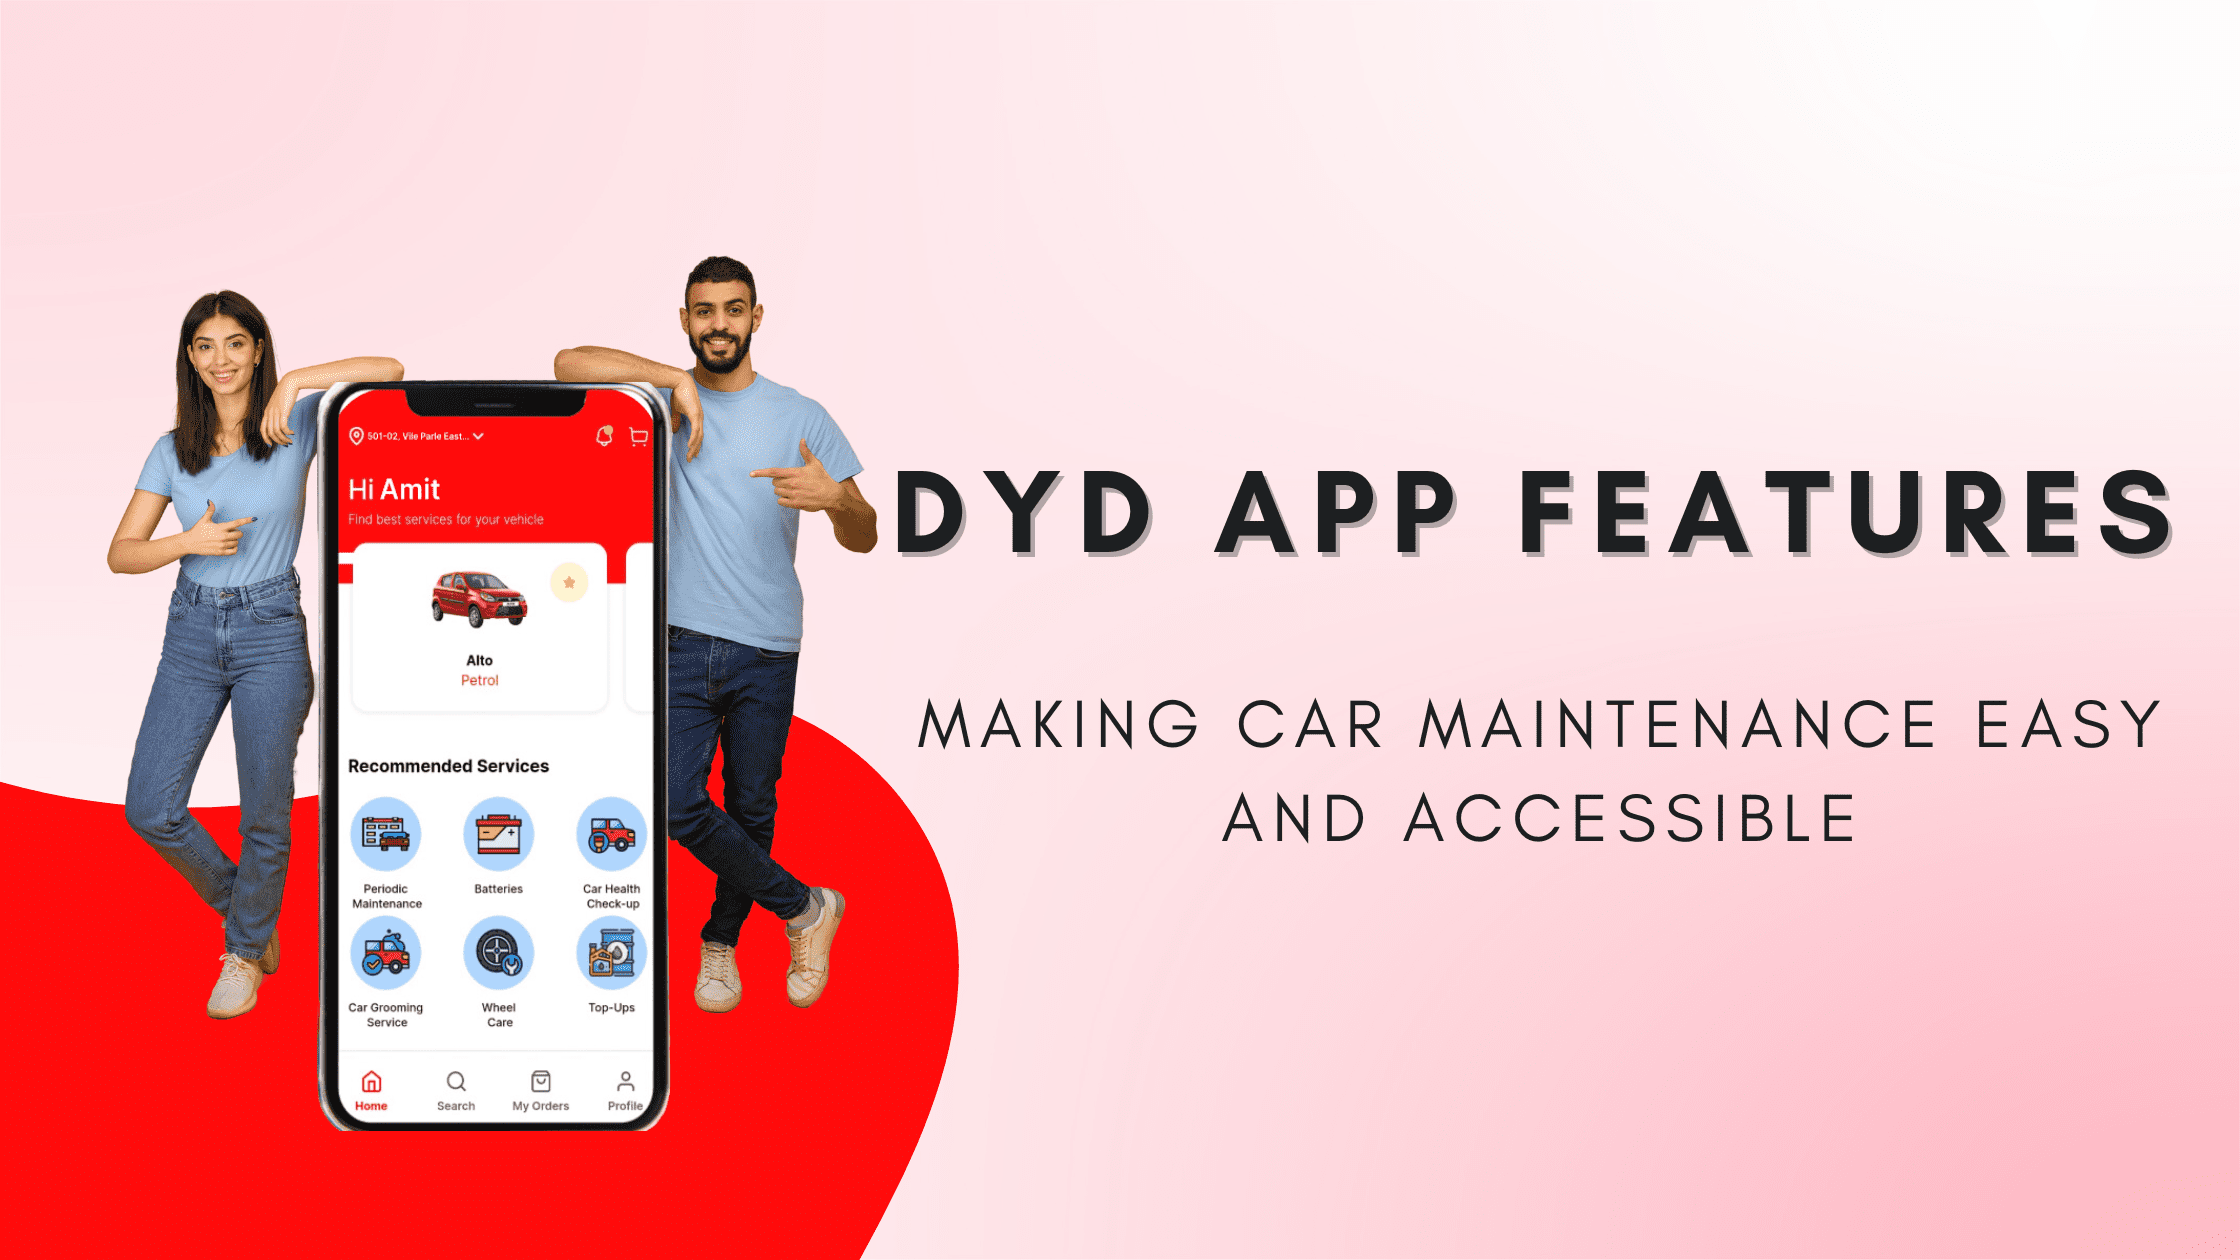 DYD App Features: Making Car Maintenance Easy and Accessible